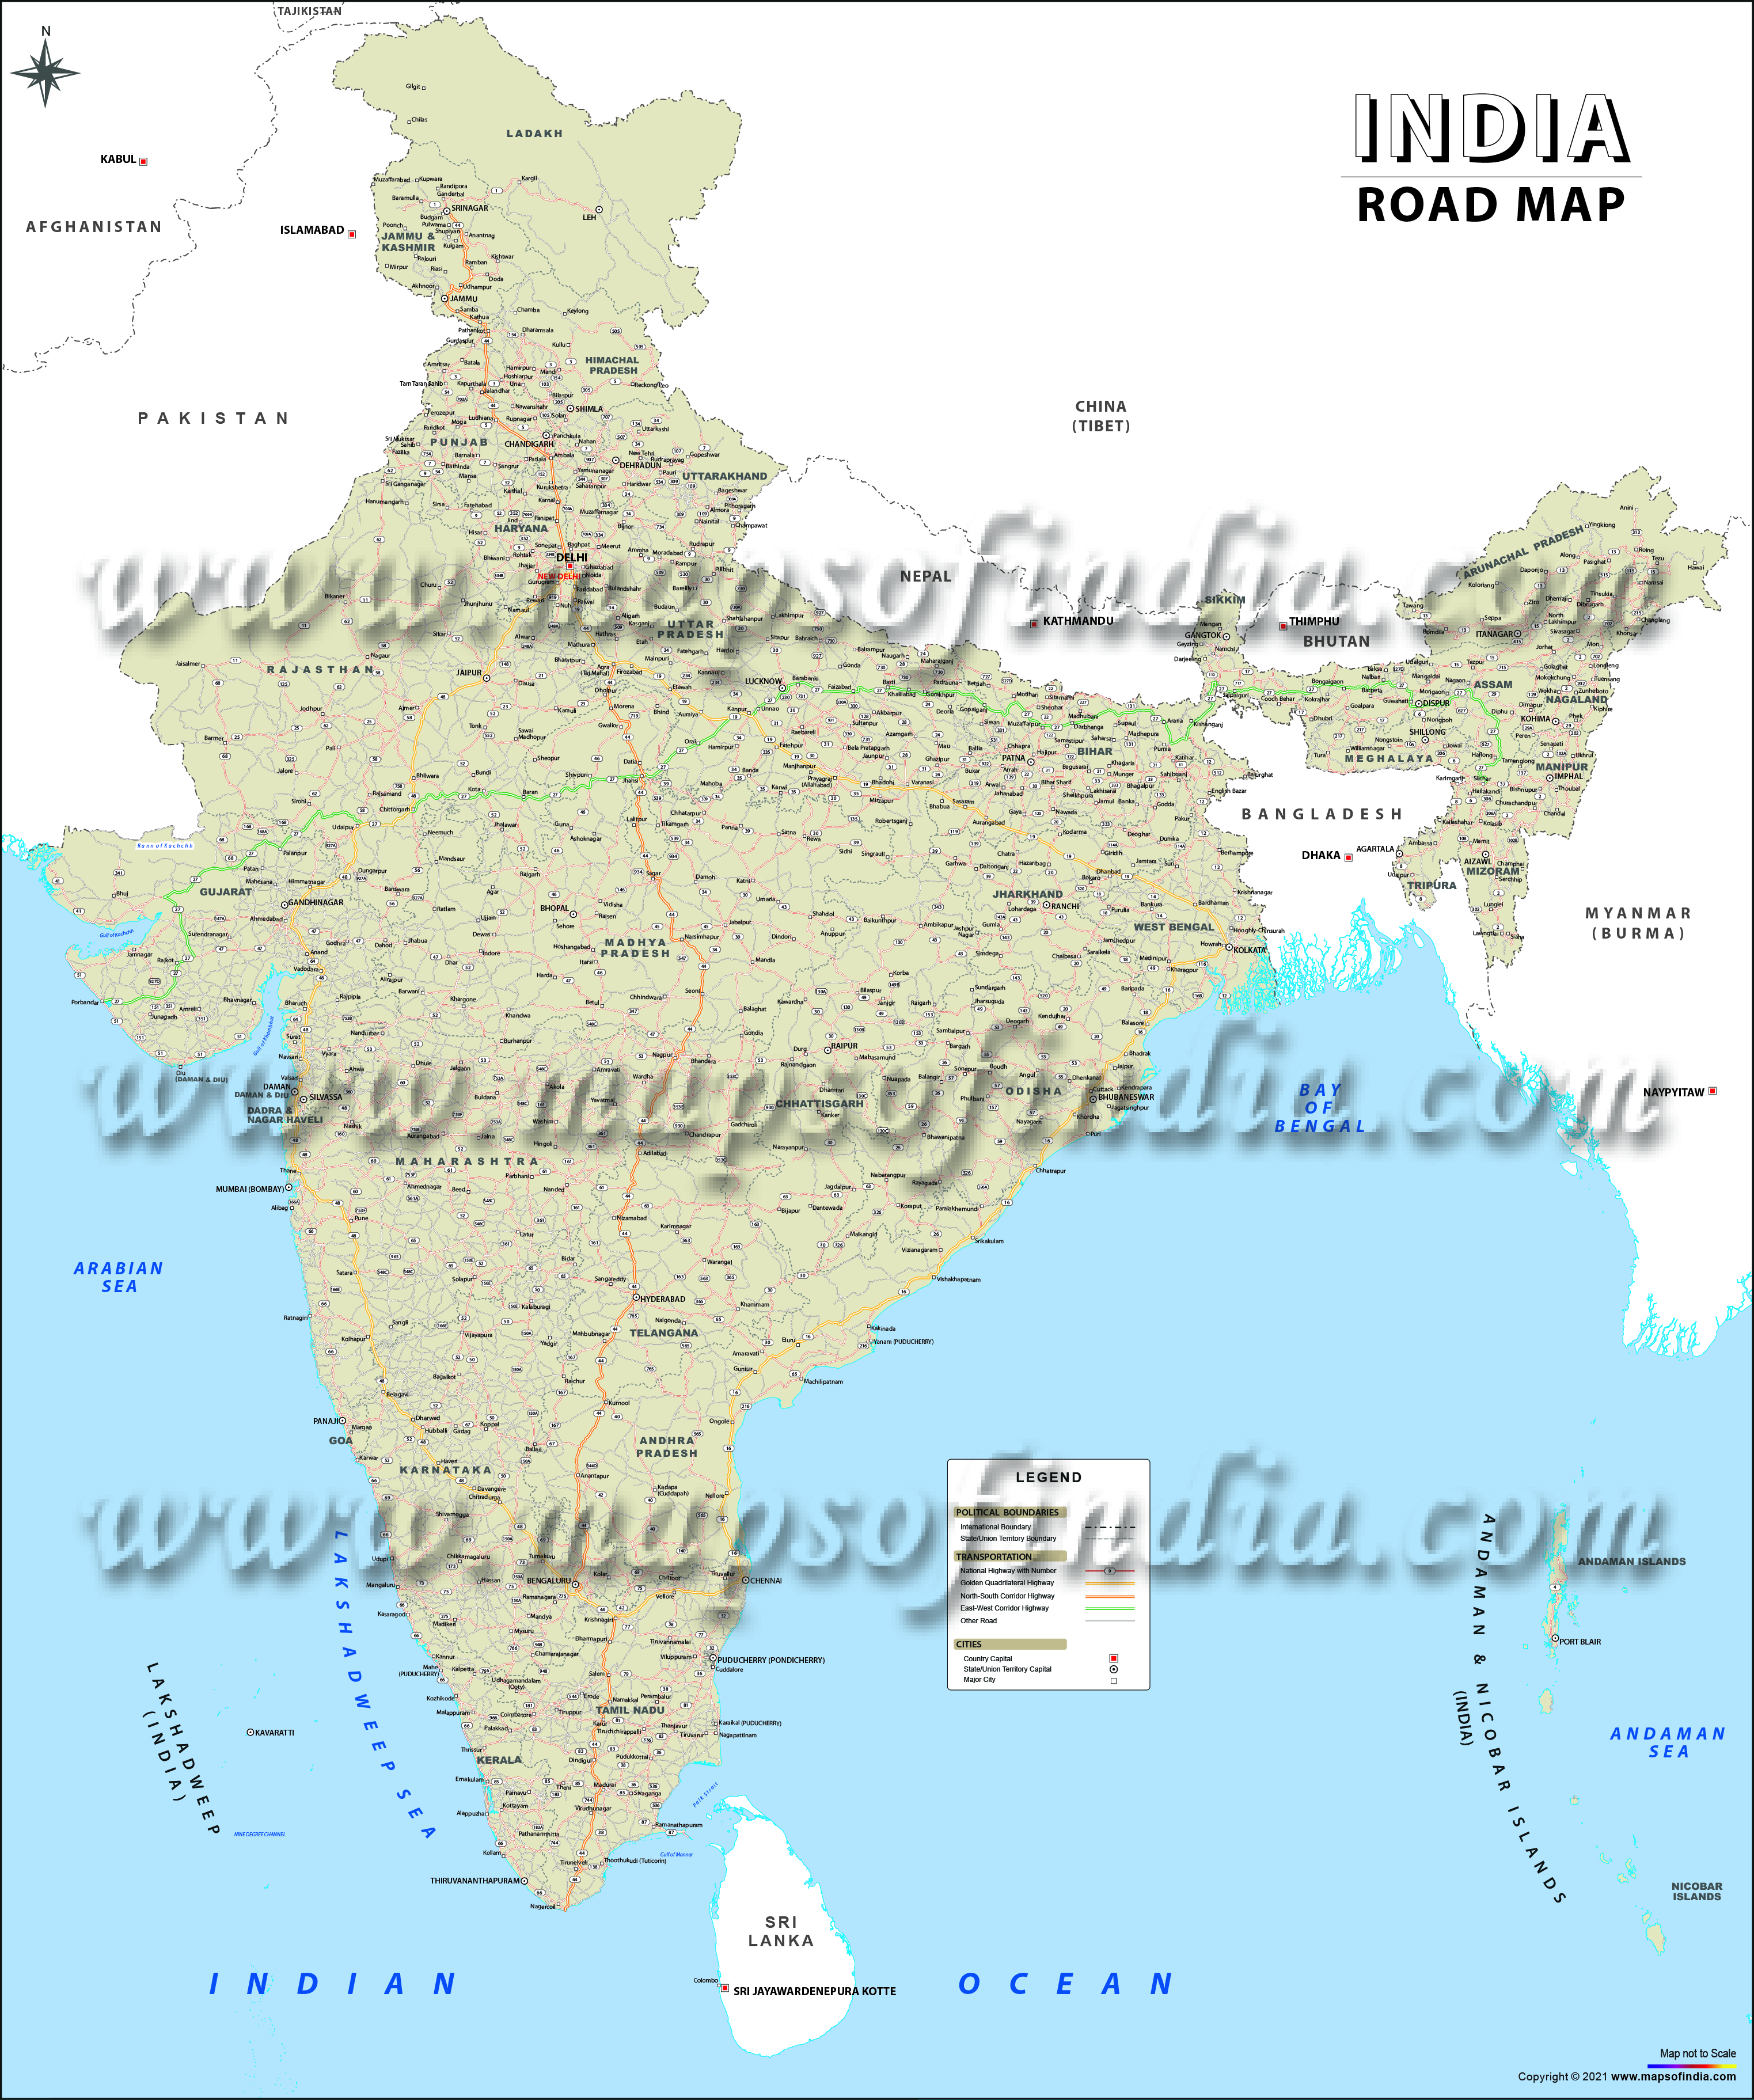 India Road Network Map India Road Maps, Indian Road Network, List of Expressways India